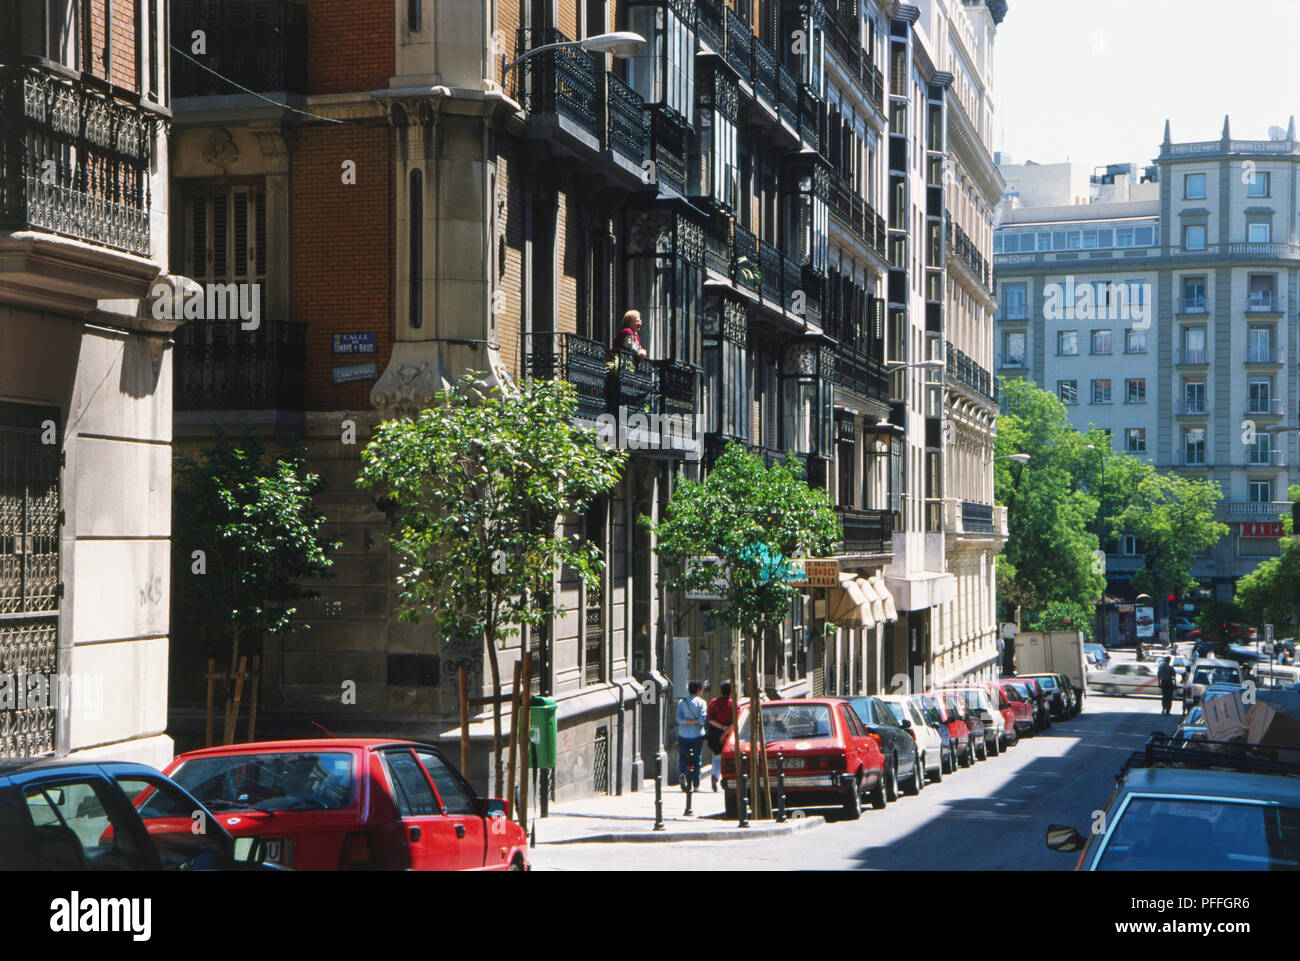 Spain, Madrid, Calle del Almirante, parked cars lining fashionable street. Stock Photo